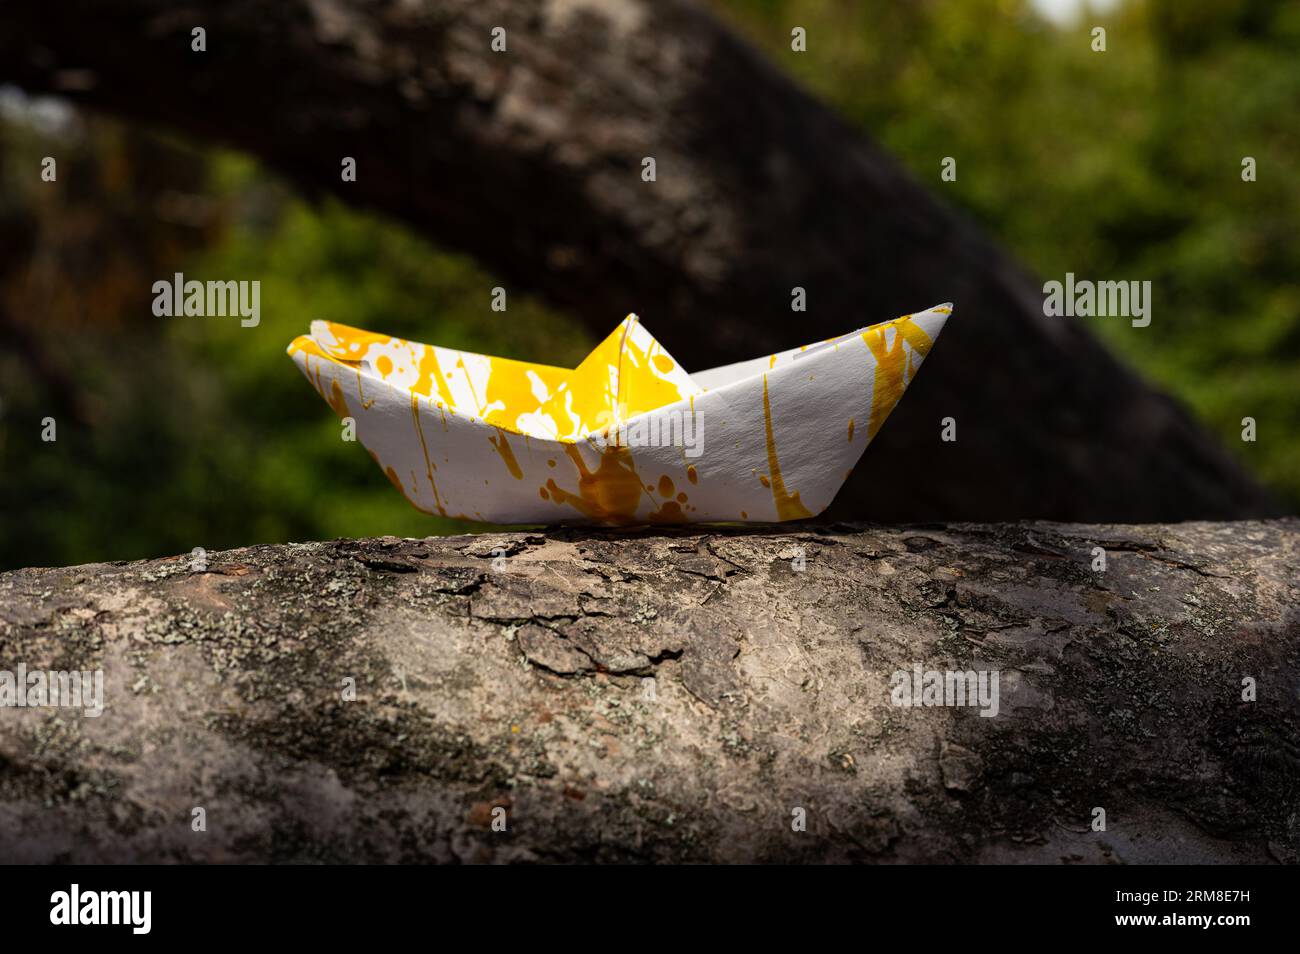 Origami paper sheep on the tree log. White and yellow colors. Handmade Stock Photo